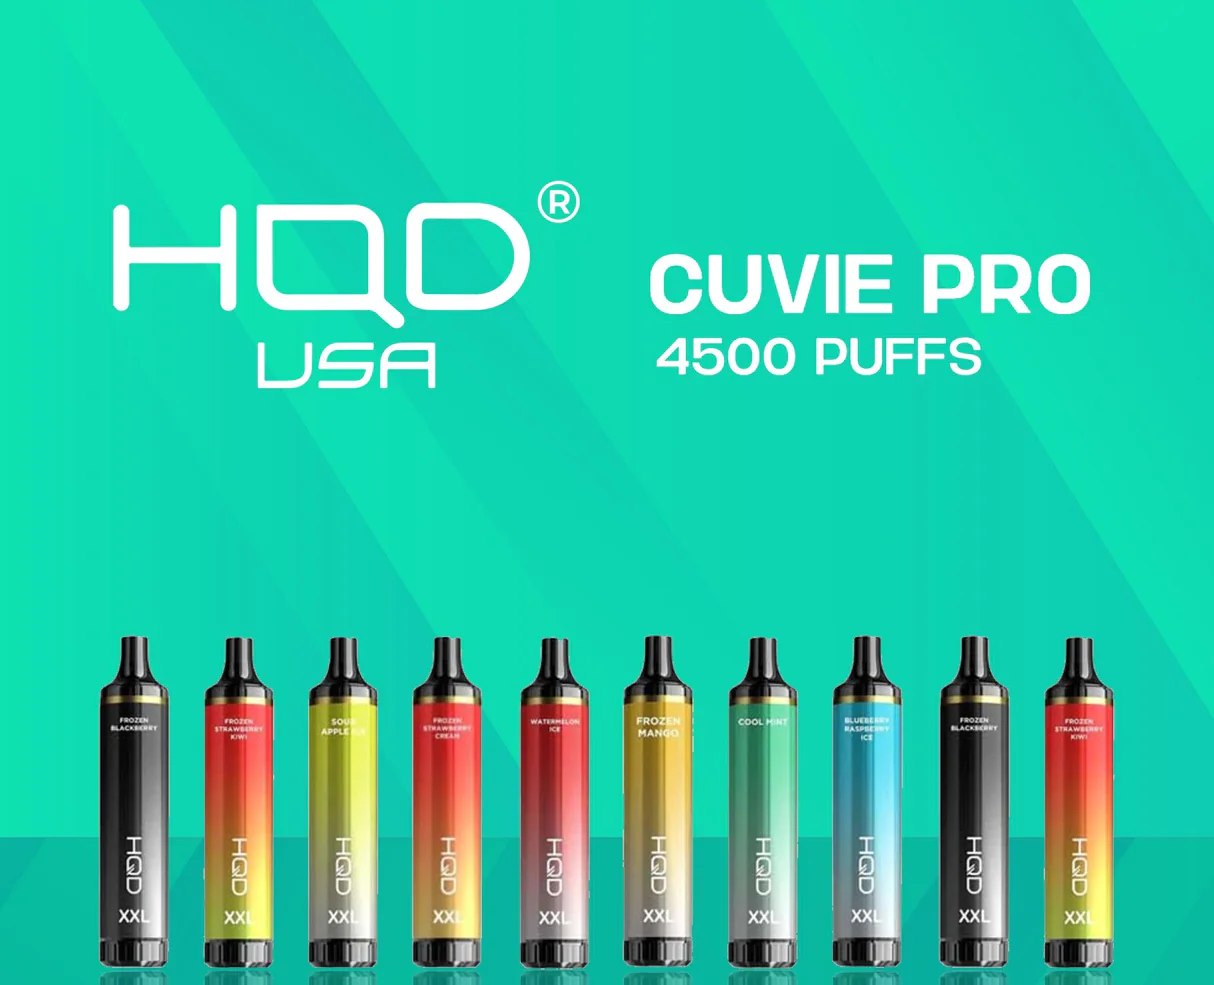 HQD Cuvie Pro: Maximize Your Vaping Experience with 4500 Puffs